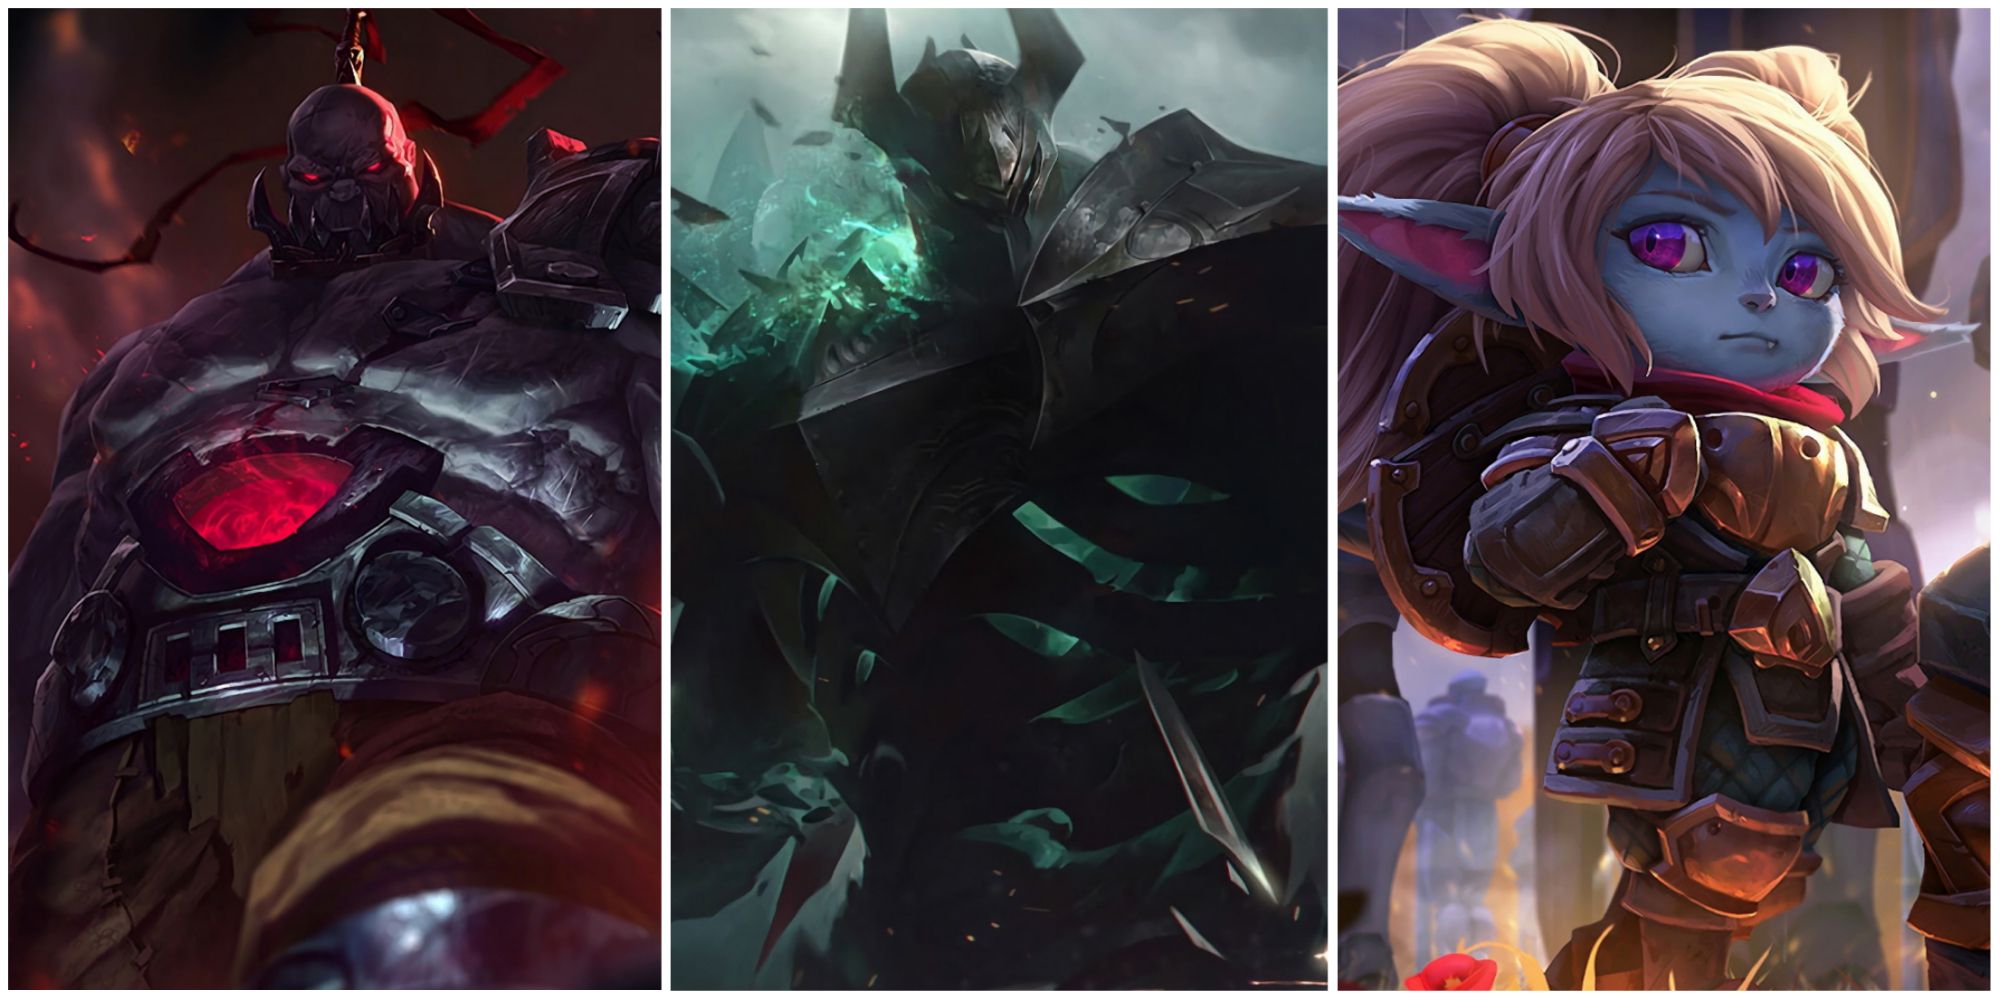 Sion, Mordekaiser, and Poppy's splash arts in League of Legends.